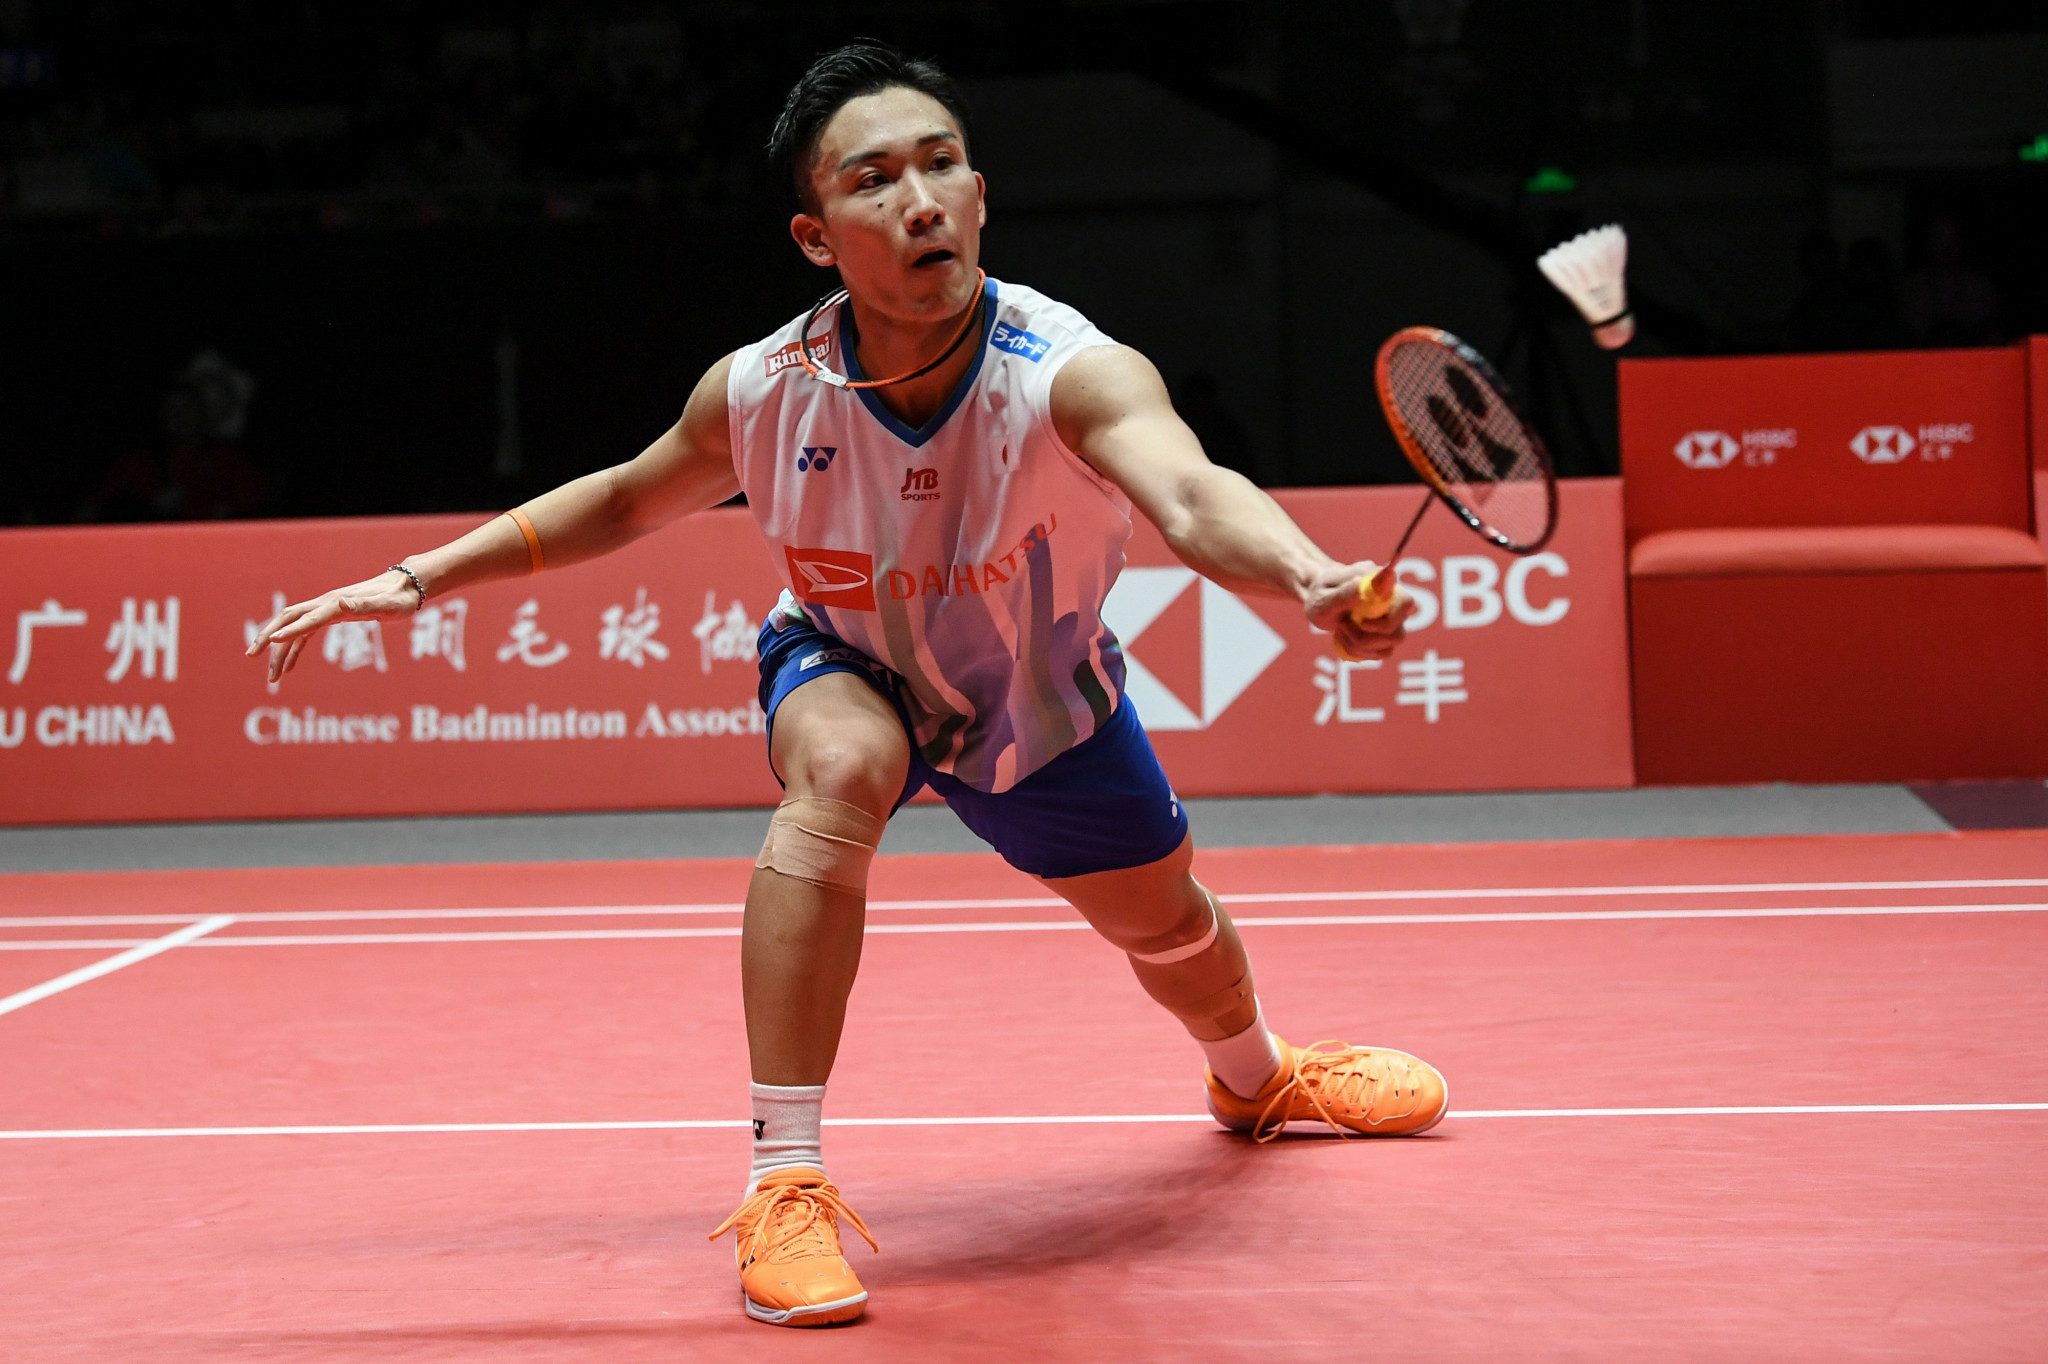 Top seed Kento Momota suffered a shock first-round exit from the BWF Malaysia Masters after losing to fellow Japanese player Kenta Nishimoto in Kuala Lumpur today ©Getty Images